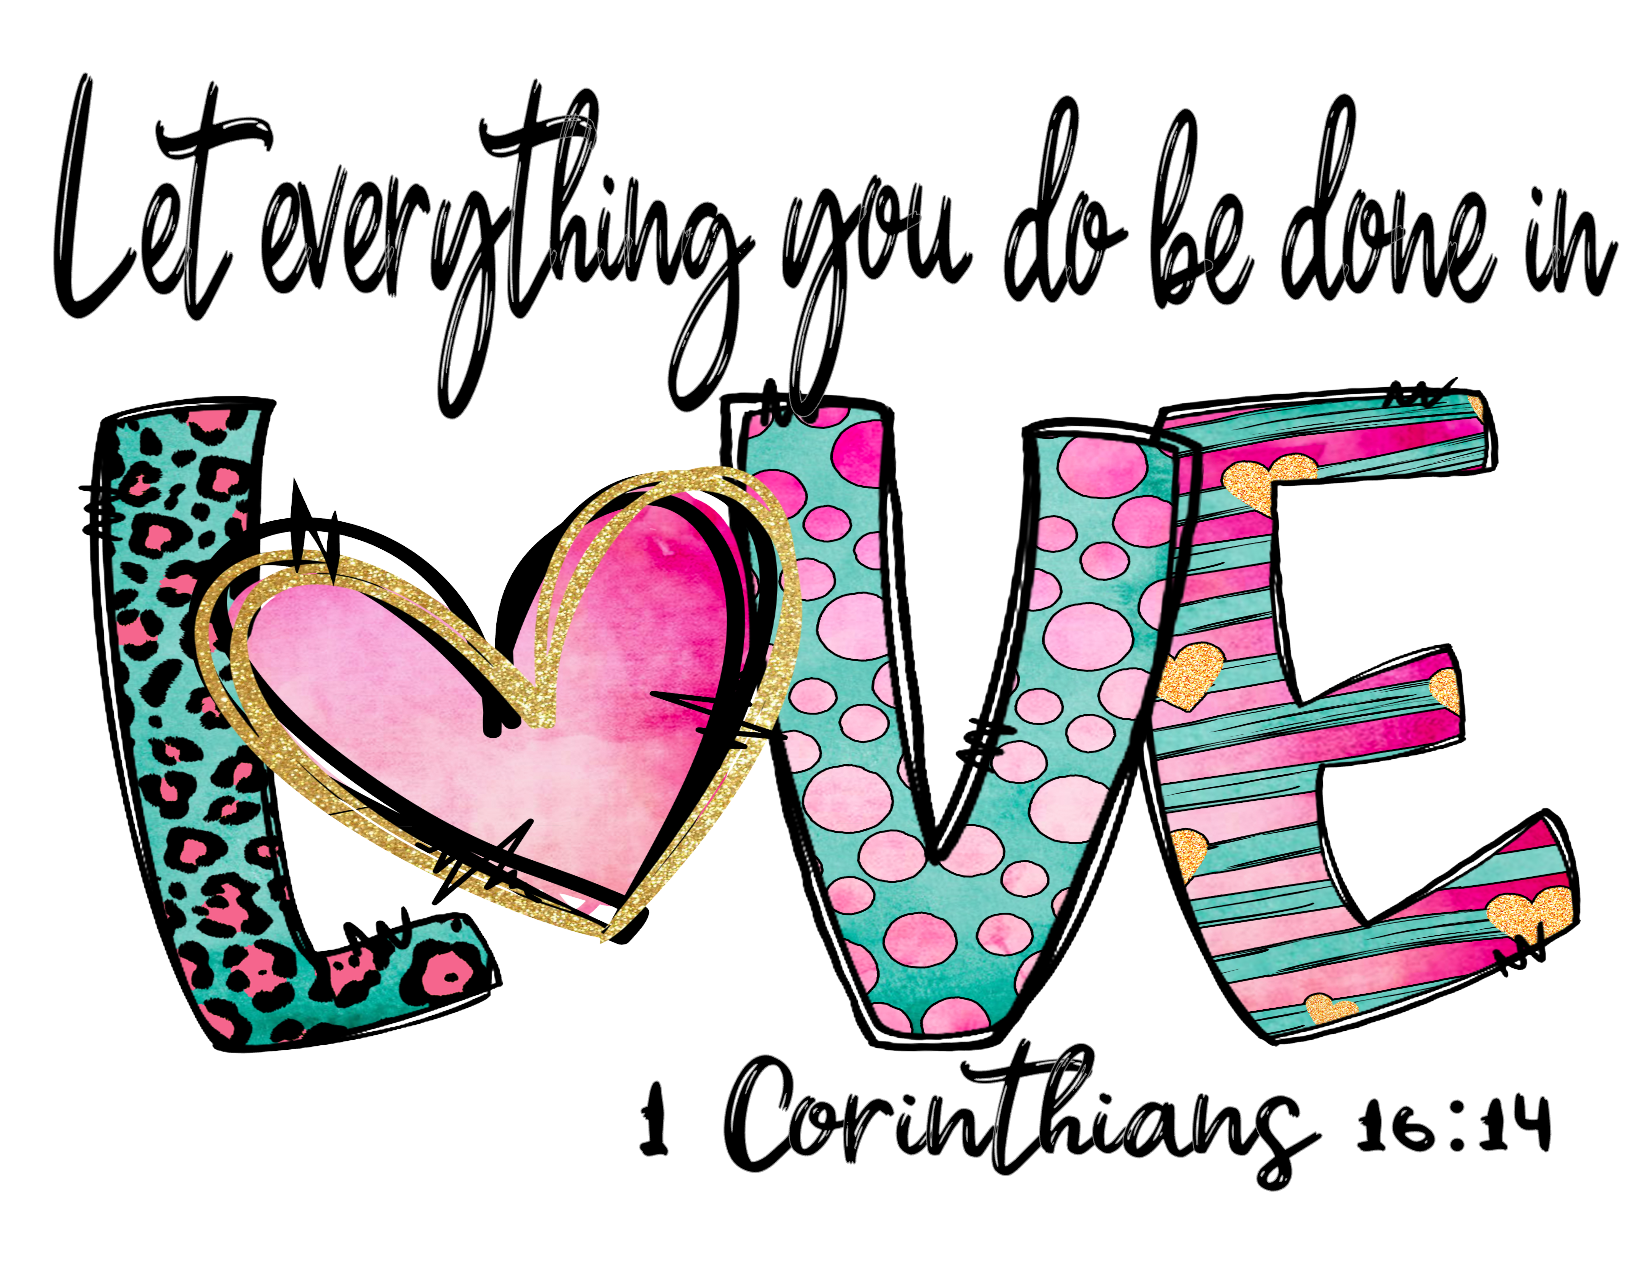 #267 Let everything you do be done in LOVE Corinthians 16:14